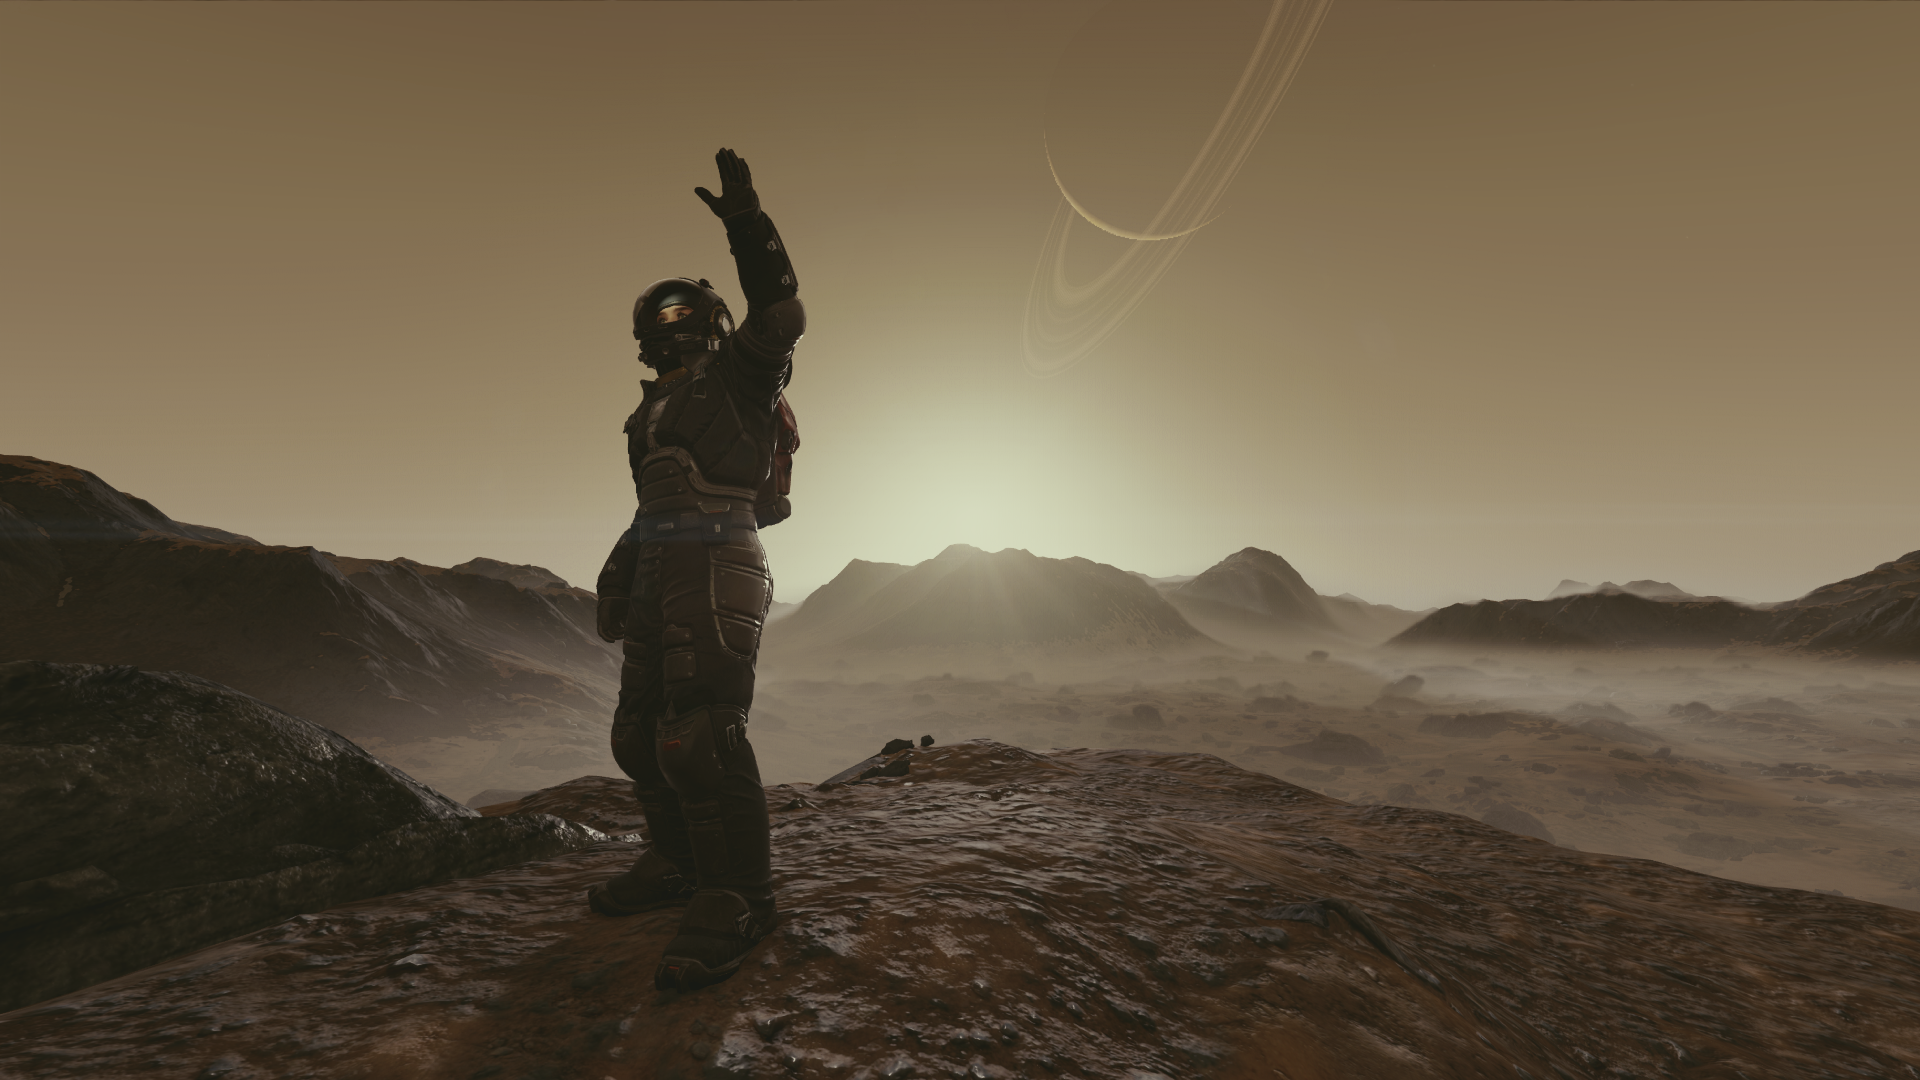 General 1920x1080 Starfield (video game) screen shot video game art CGI video game characters waving spacesuit video games standing mountains landscape sunlight